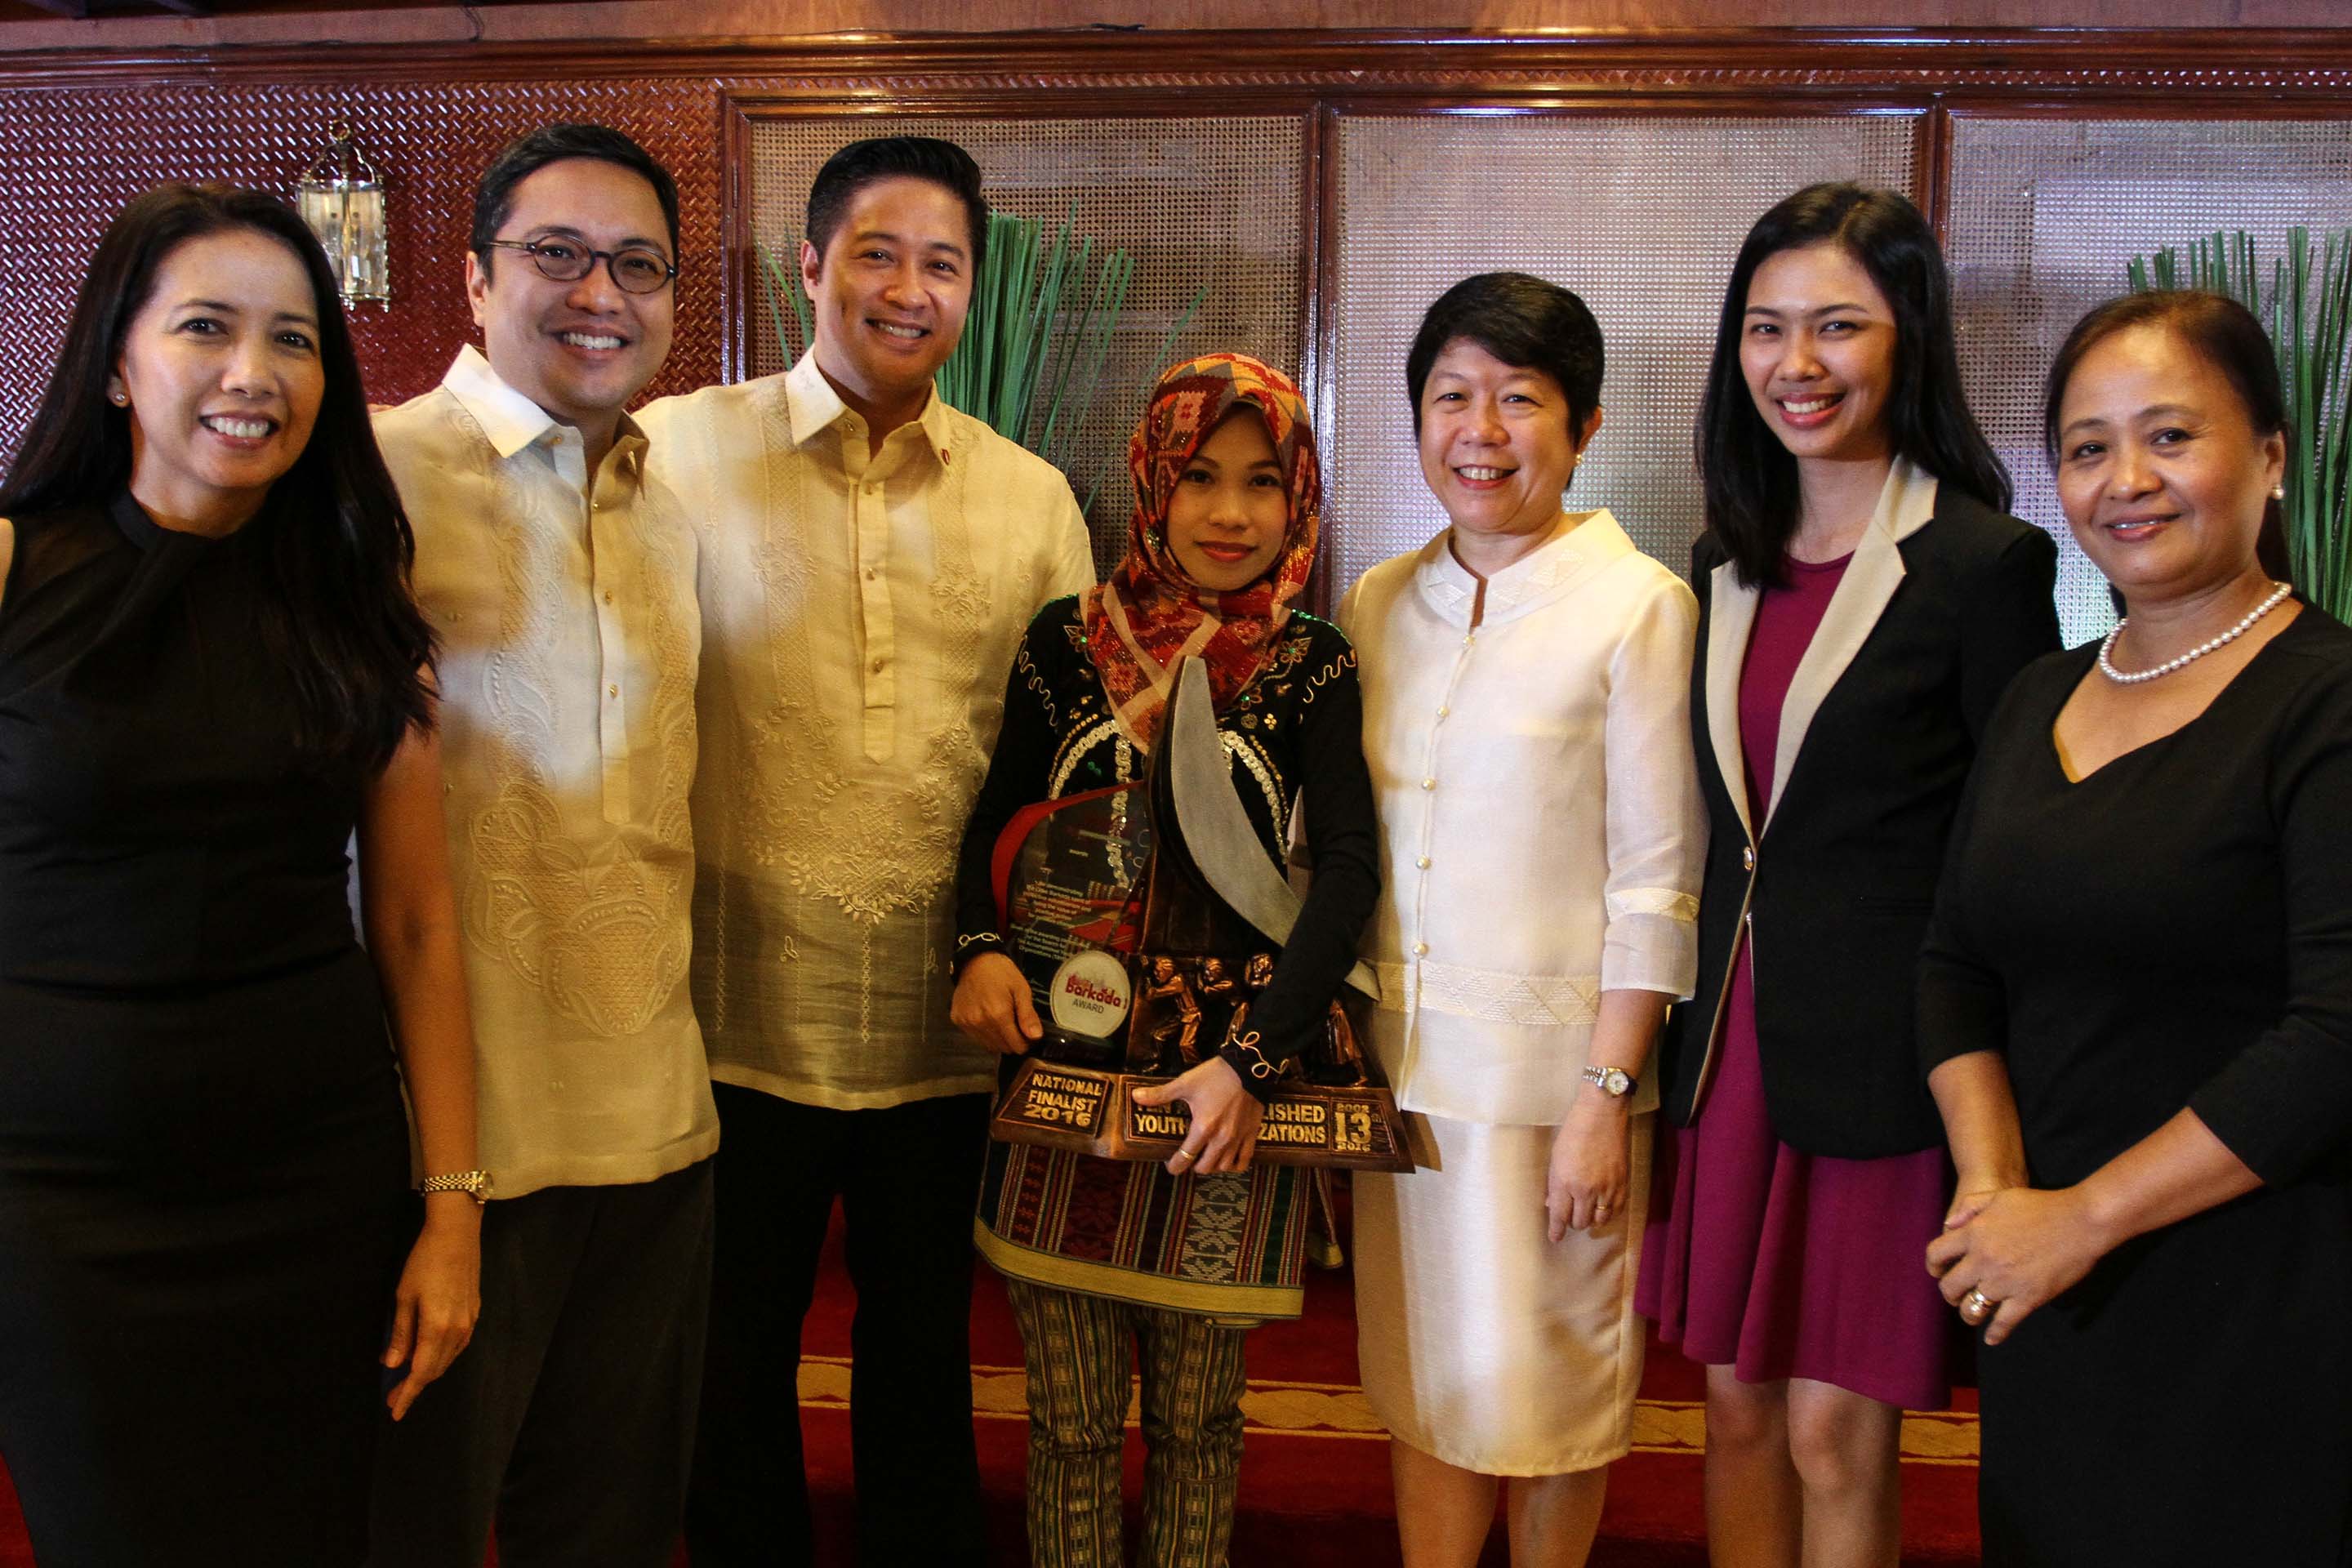 The Coca-Cola Barkada Award was given to Nasiba Salip (center), president of the Youth Working for Change in Basilan, for their Project BOHE (Building Opportunities through Health and Environment), which provides access to potable water in the upland communities of Basilan. In the photo are Coca-Cola Foundation Program Officer Ting Cabalza, Coca-Cola FEMSA Philippines Legal and Corporate Affairs Associate Director Atty. Juan Lorenzo Tañada, Coca-Cola Philippines Vice President for Public Affairs and Communications Adel Tamano, Coca-Cola Philippines Foundation President Cecilia Alcantara, Coca-Cola Foundation Philippines Program Officer Pamela de Leon, and Coca-Cola Foundation Philippines Program Officer for Environment Monina Pacheco.